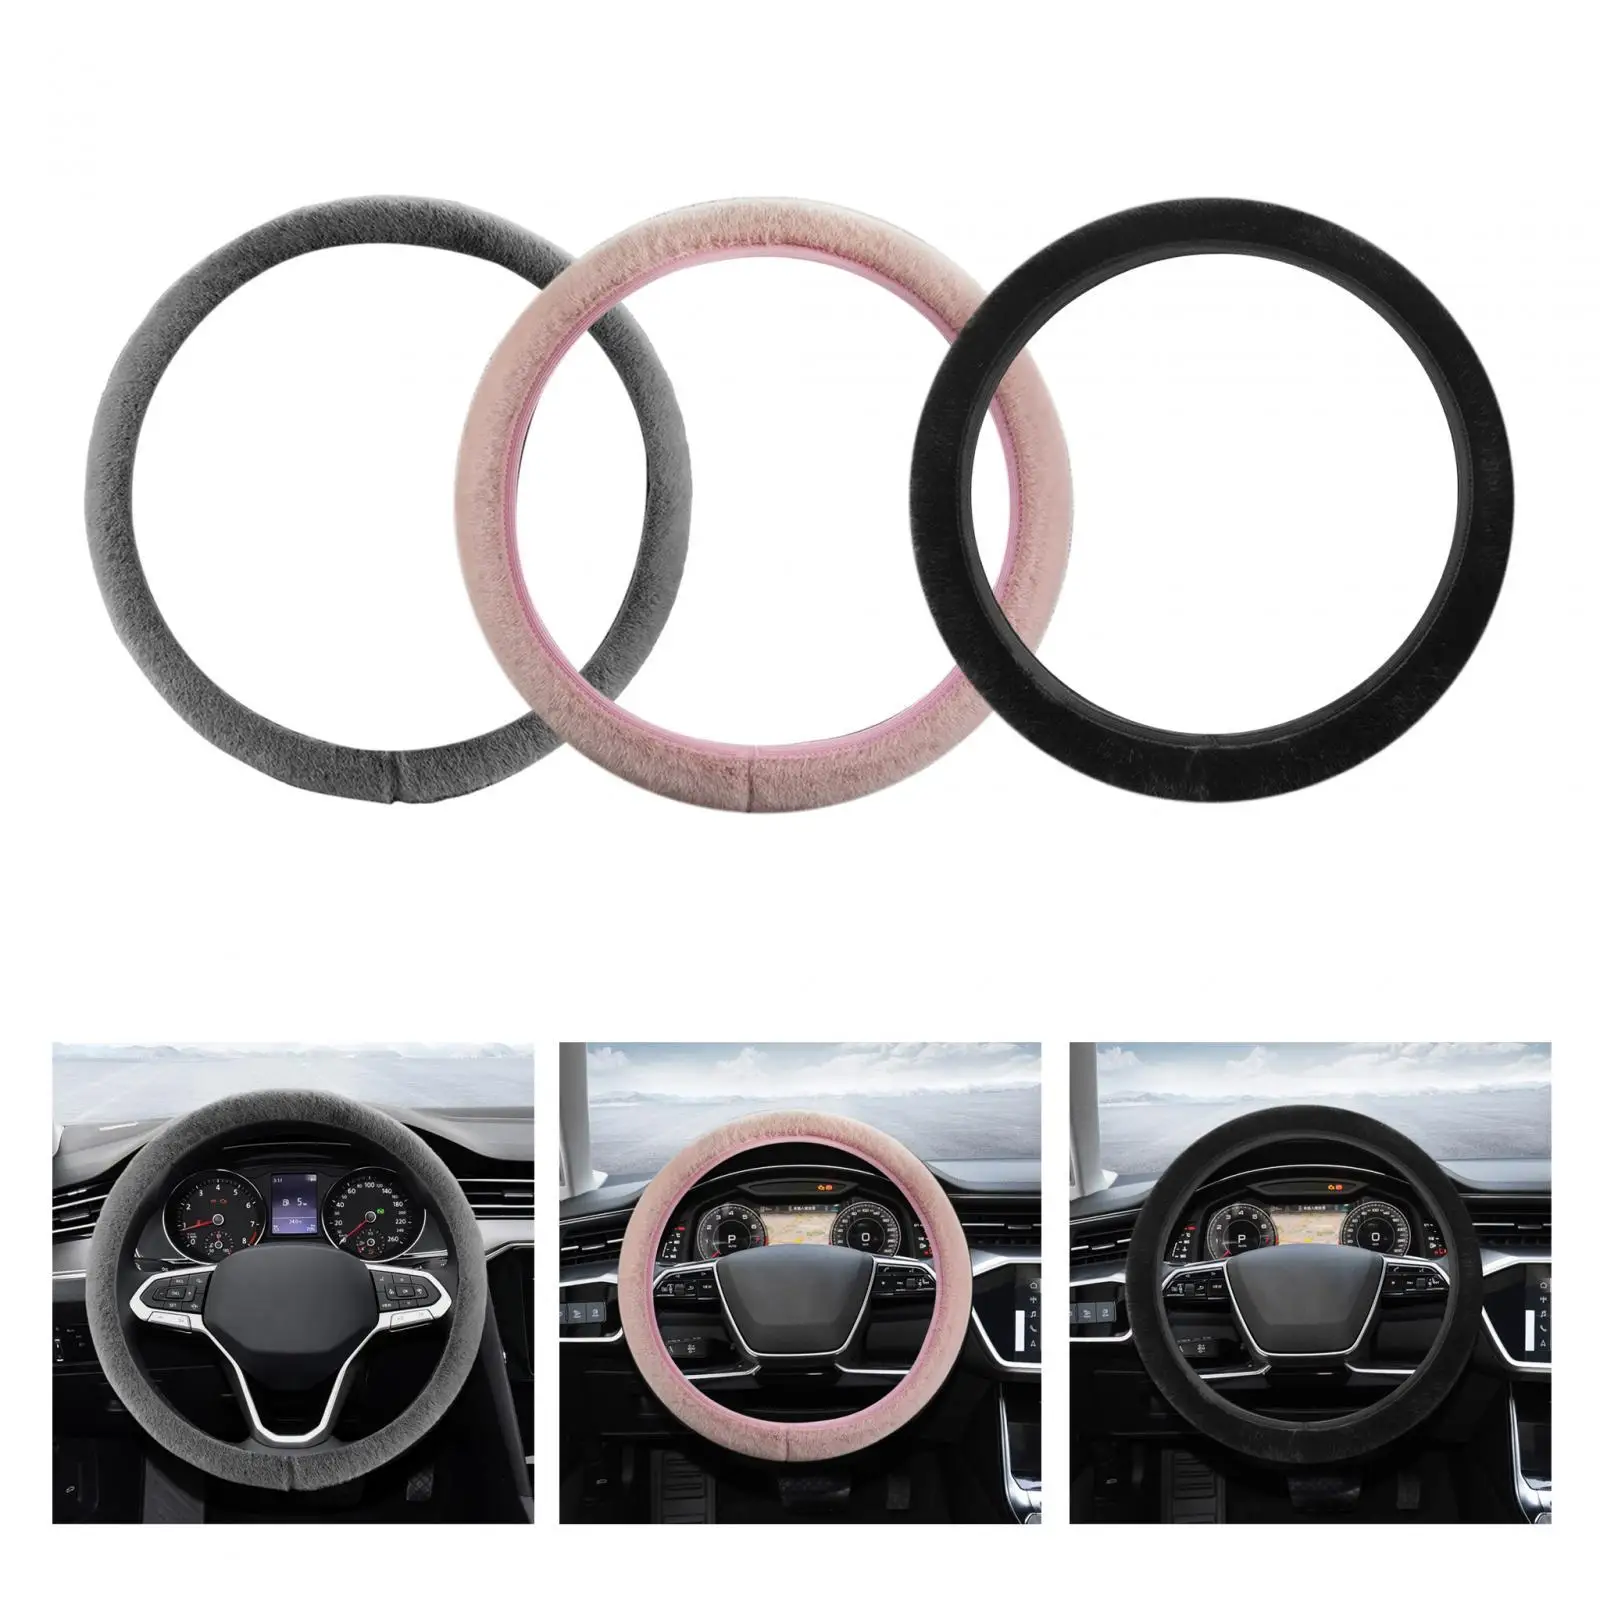 15inch Winter Plush Steering Wheel Cover Protector Accessories Wear Resistant Breathable Stylish Anti Slip Comfortable Grip